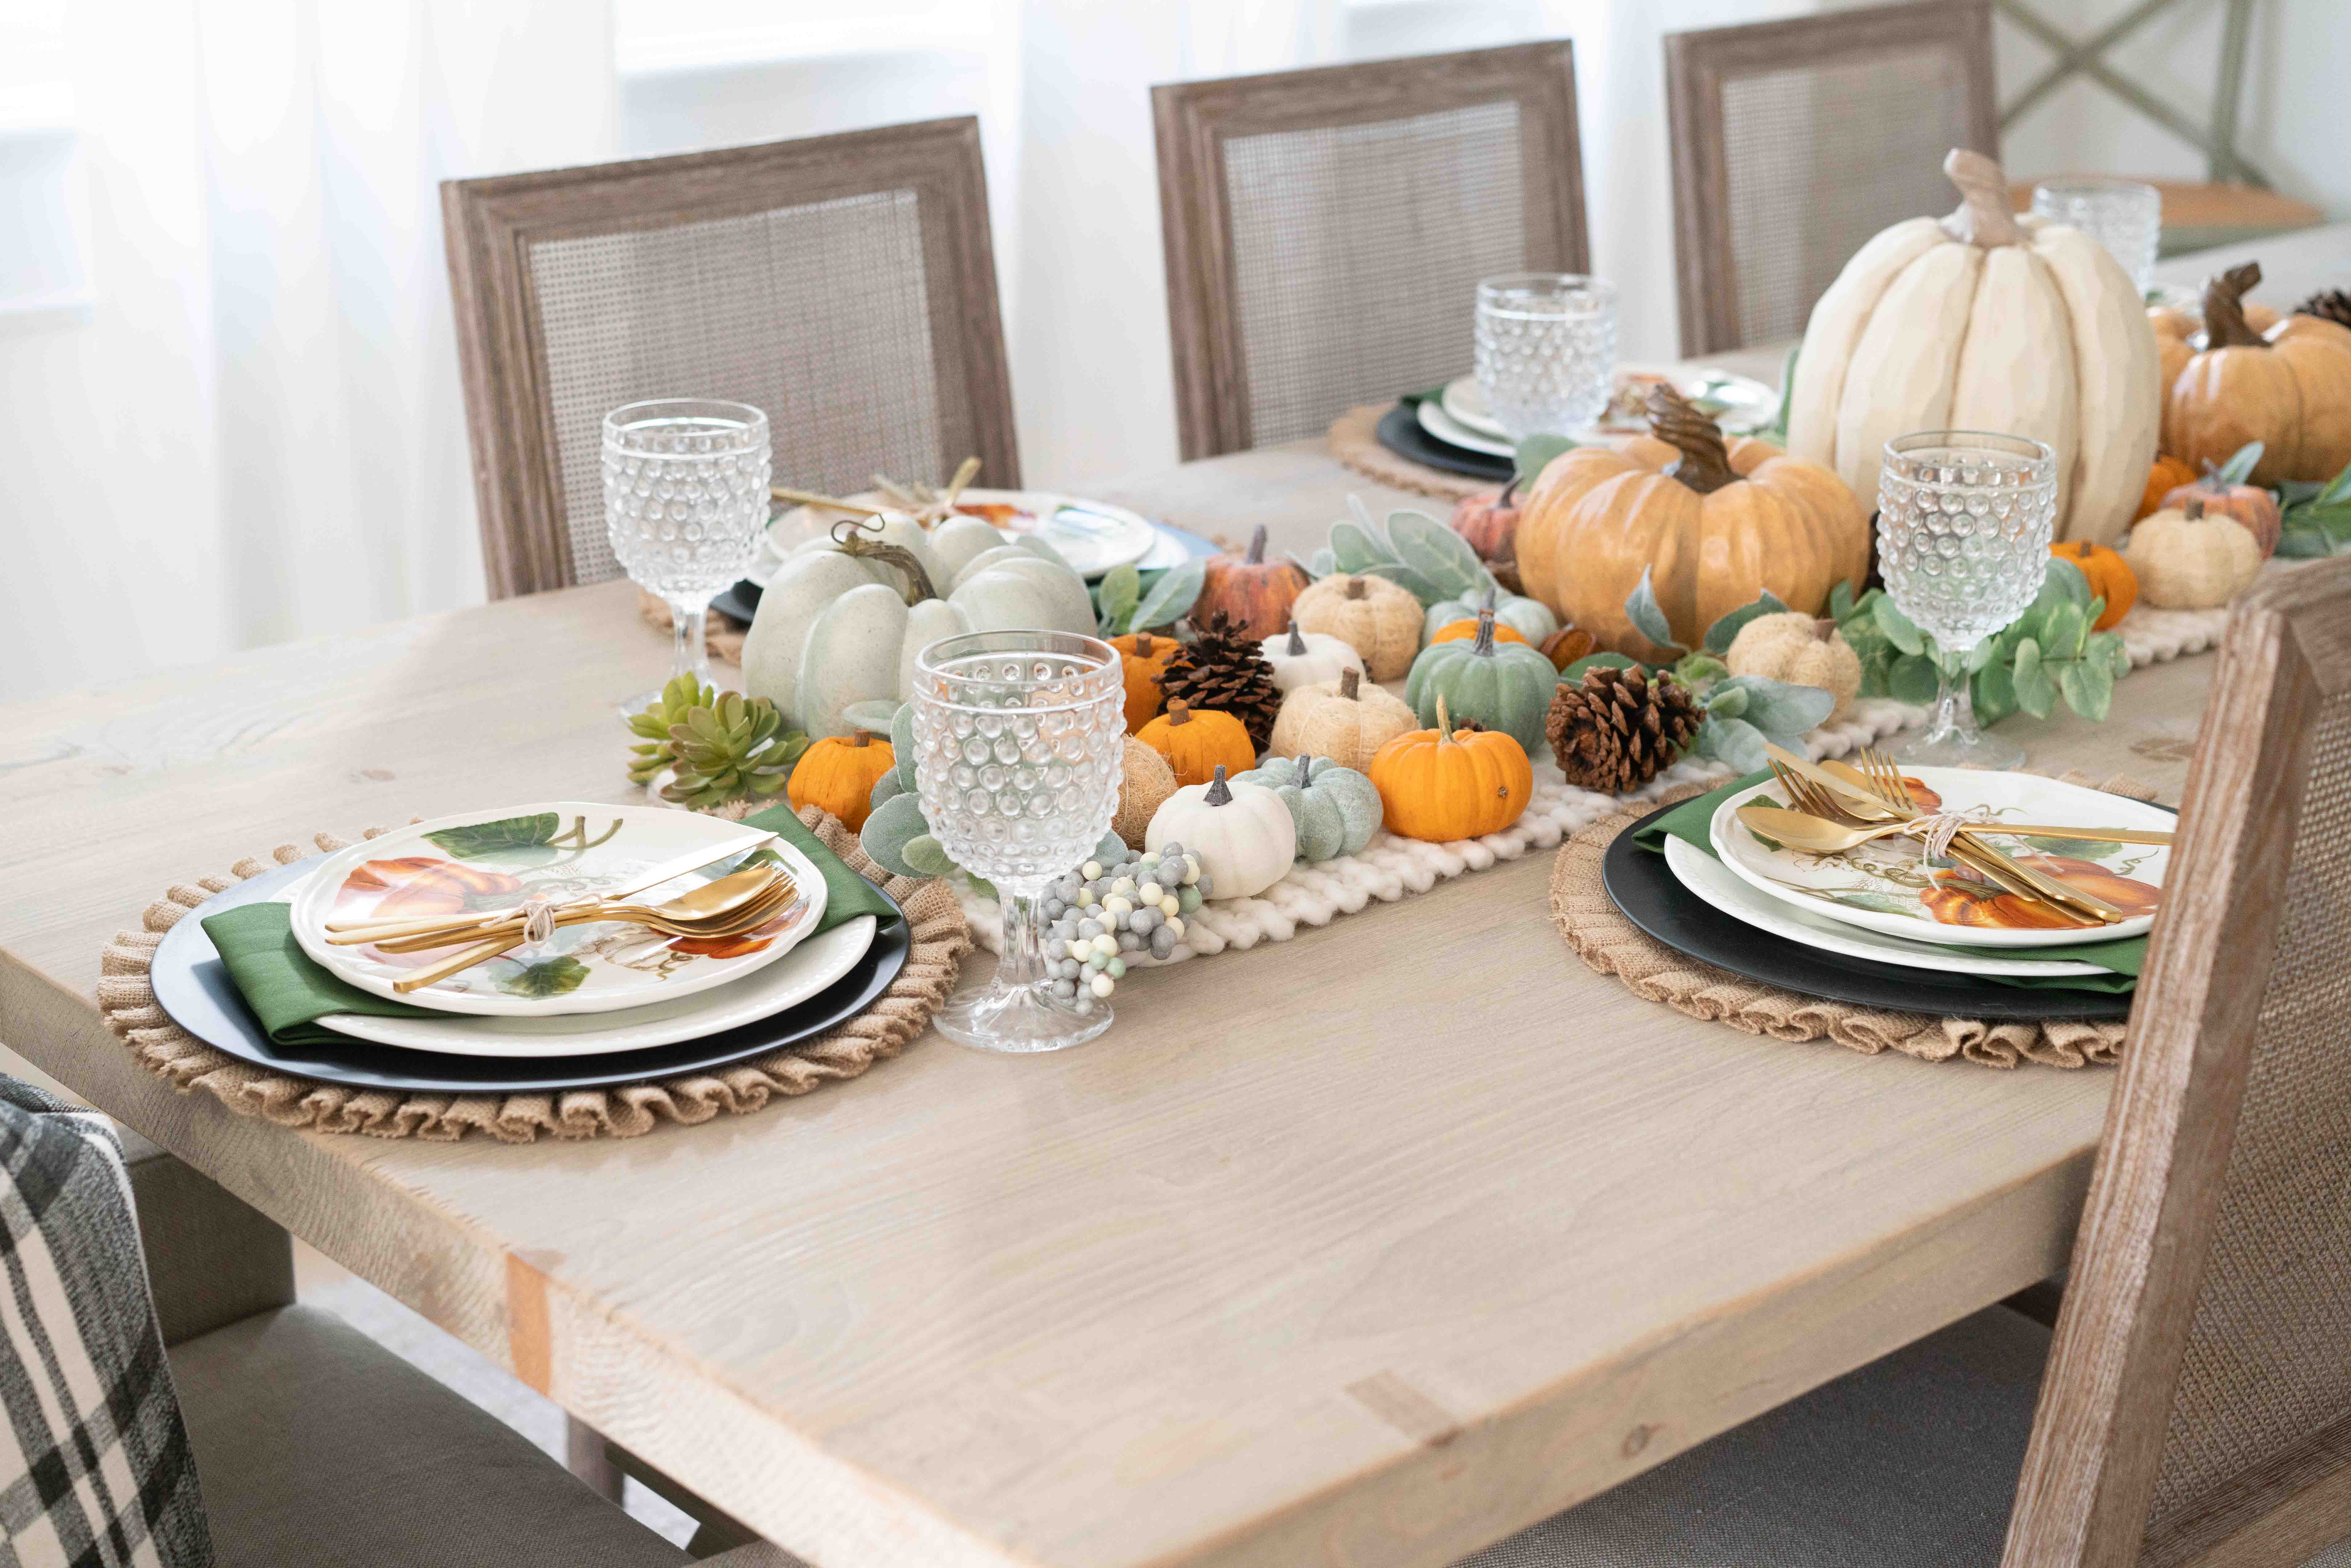 Dining Room Tour: Fall Decor Ideas To Make Your Home Stand Out